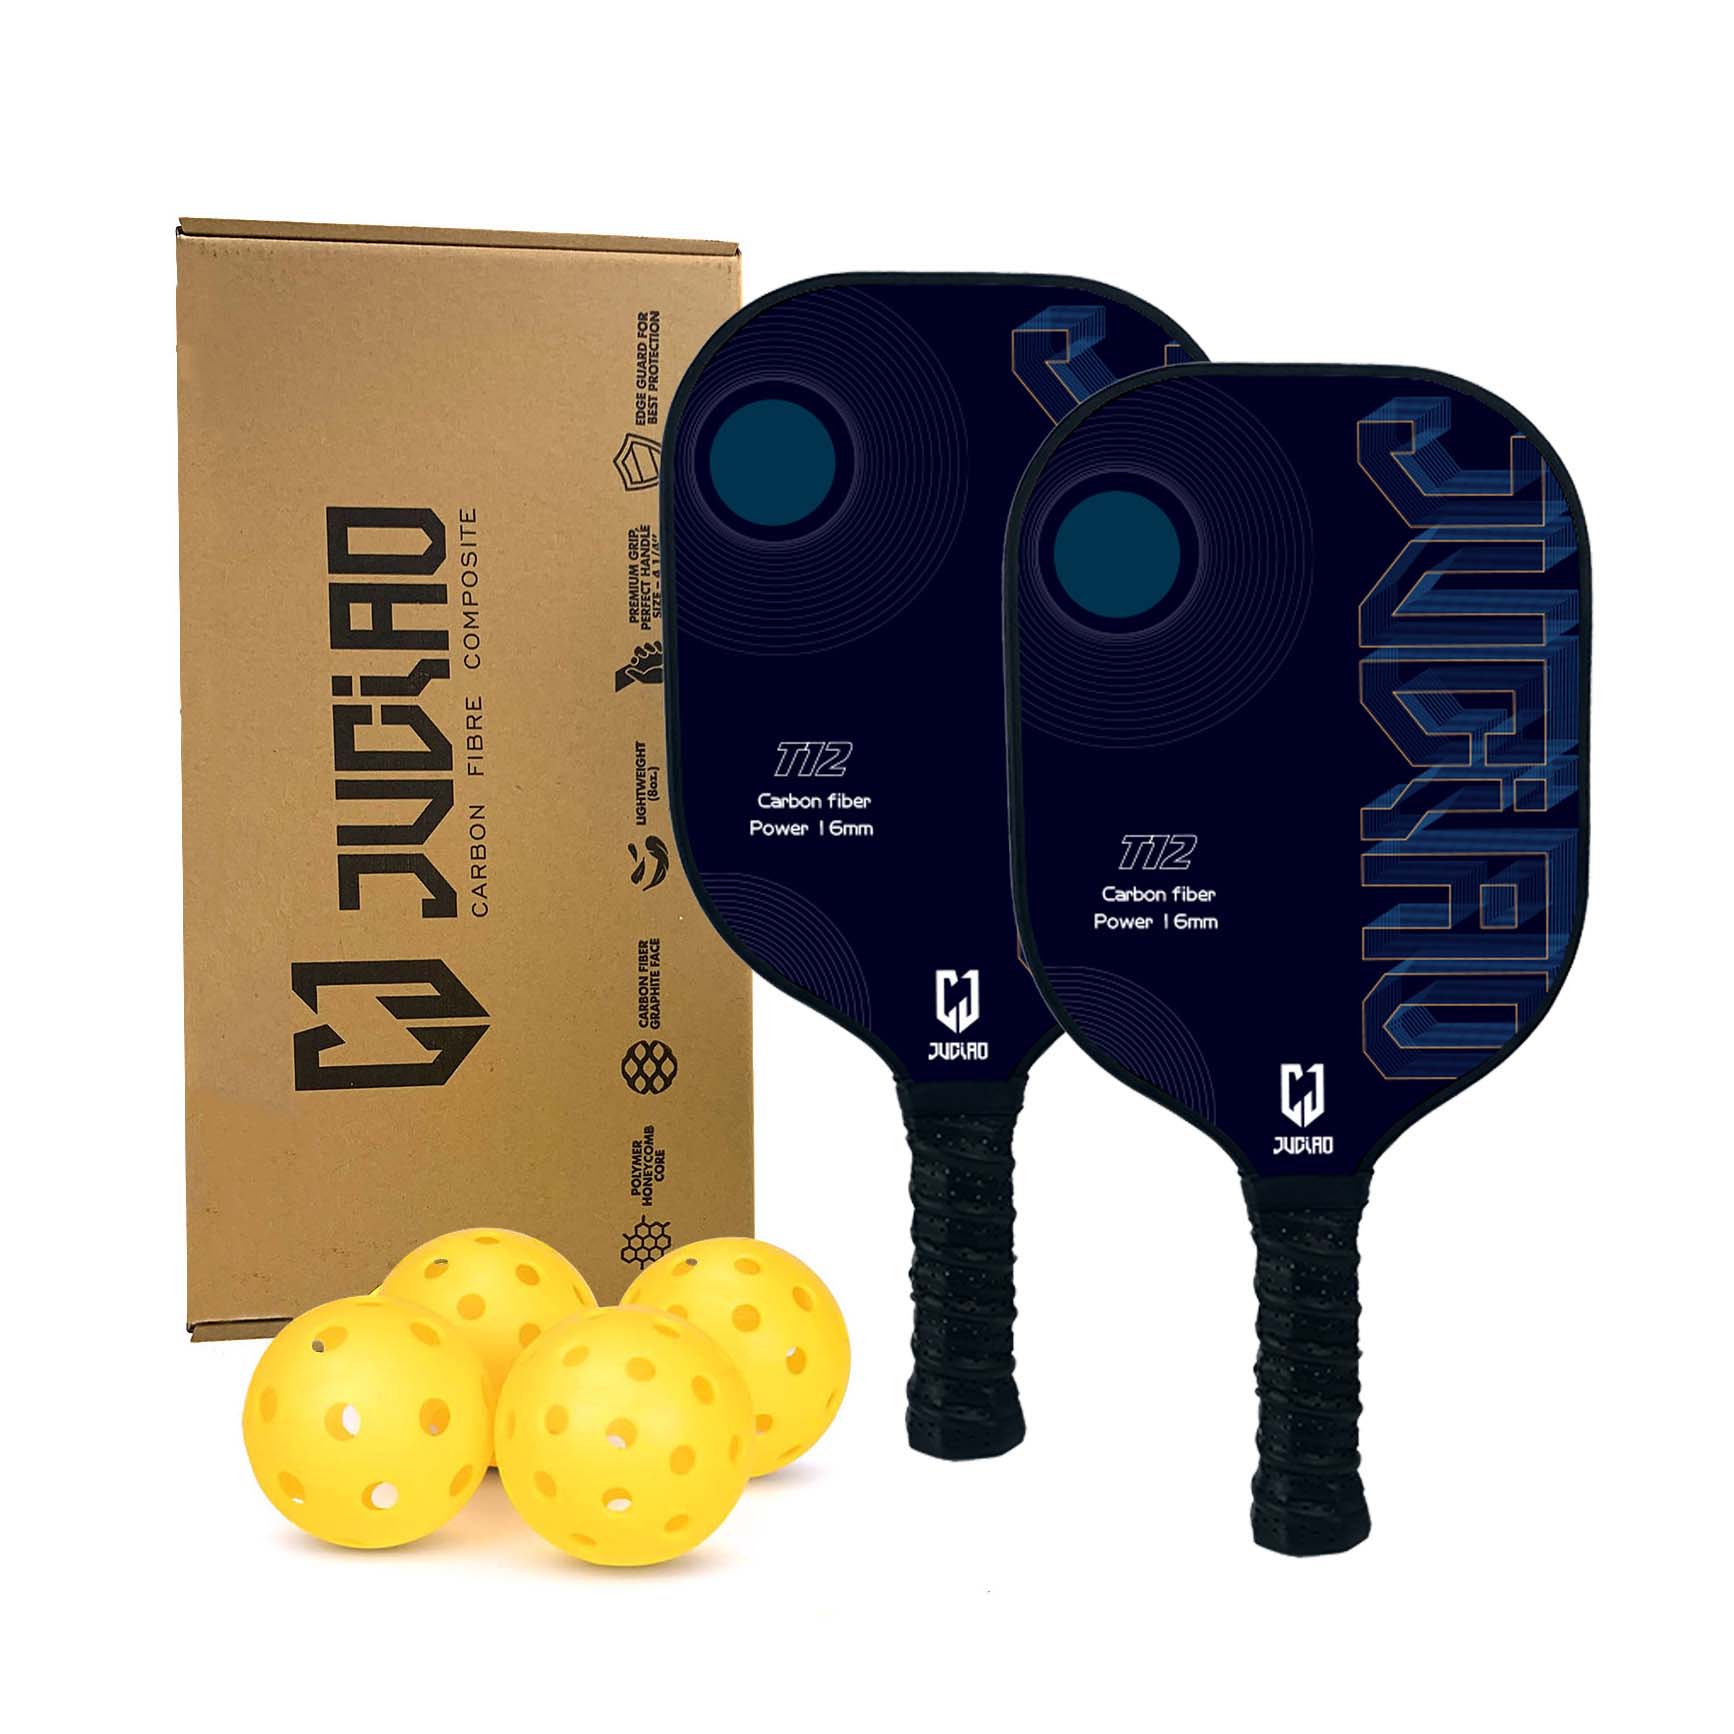 Breaking conventions and embracing new trends: creating top-notch pickleball pads